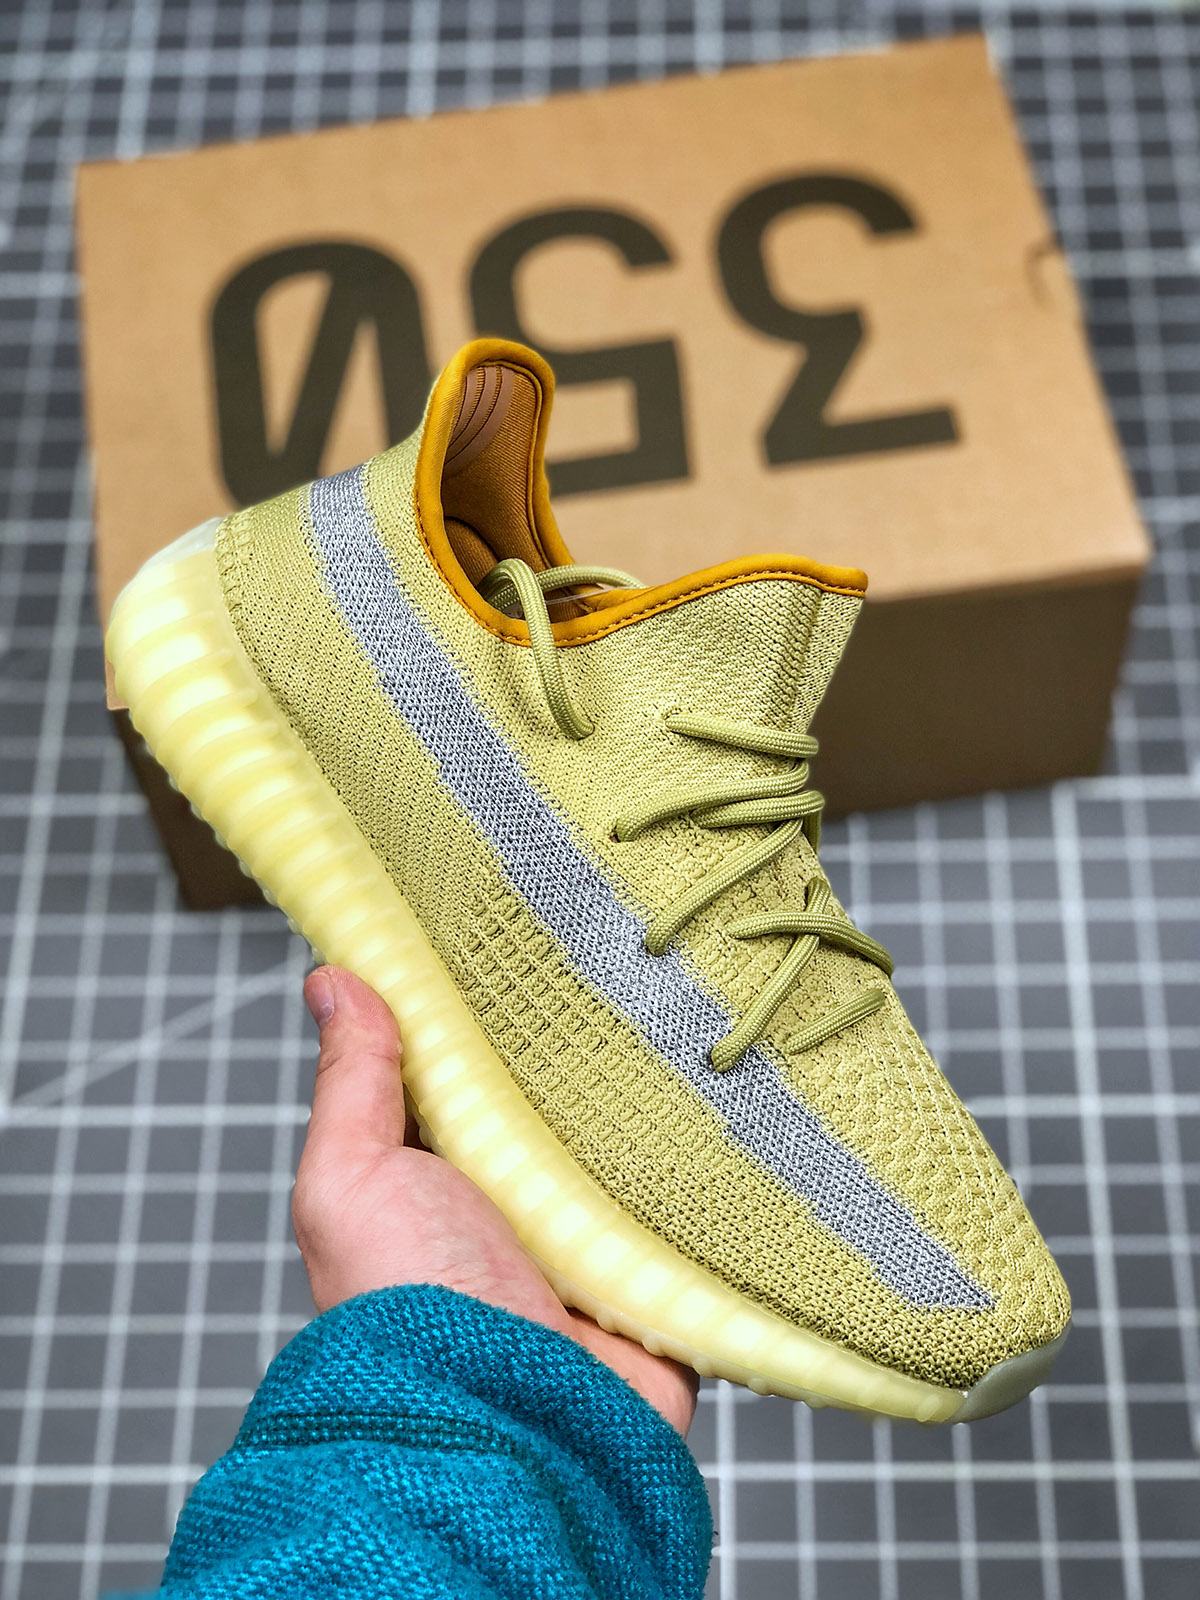 clue Admission By name adidas Yeezy Boost 350 V2 “Marsh” FX9034 For Sale – Sneaker Hello